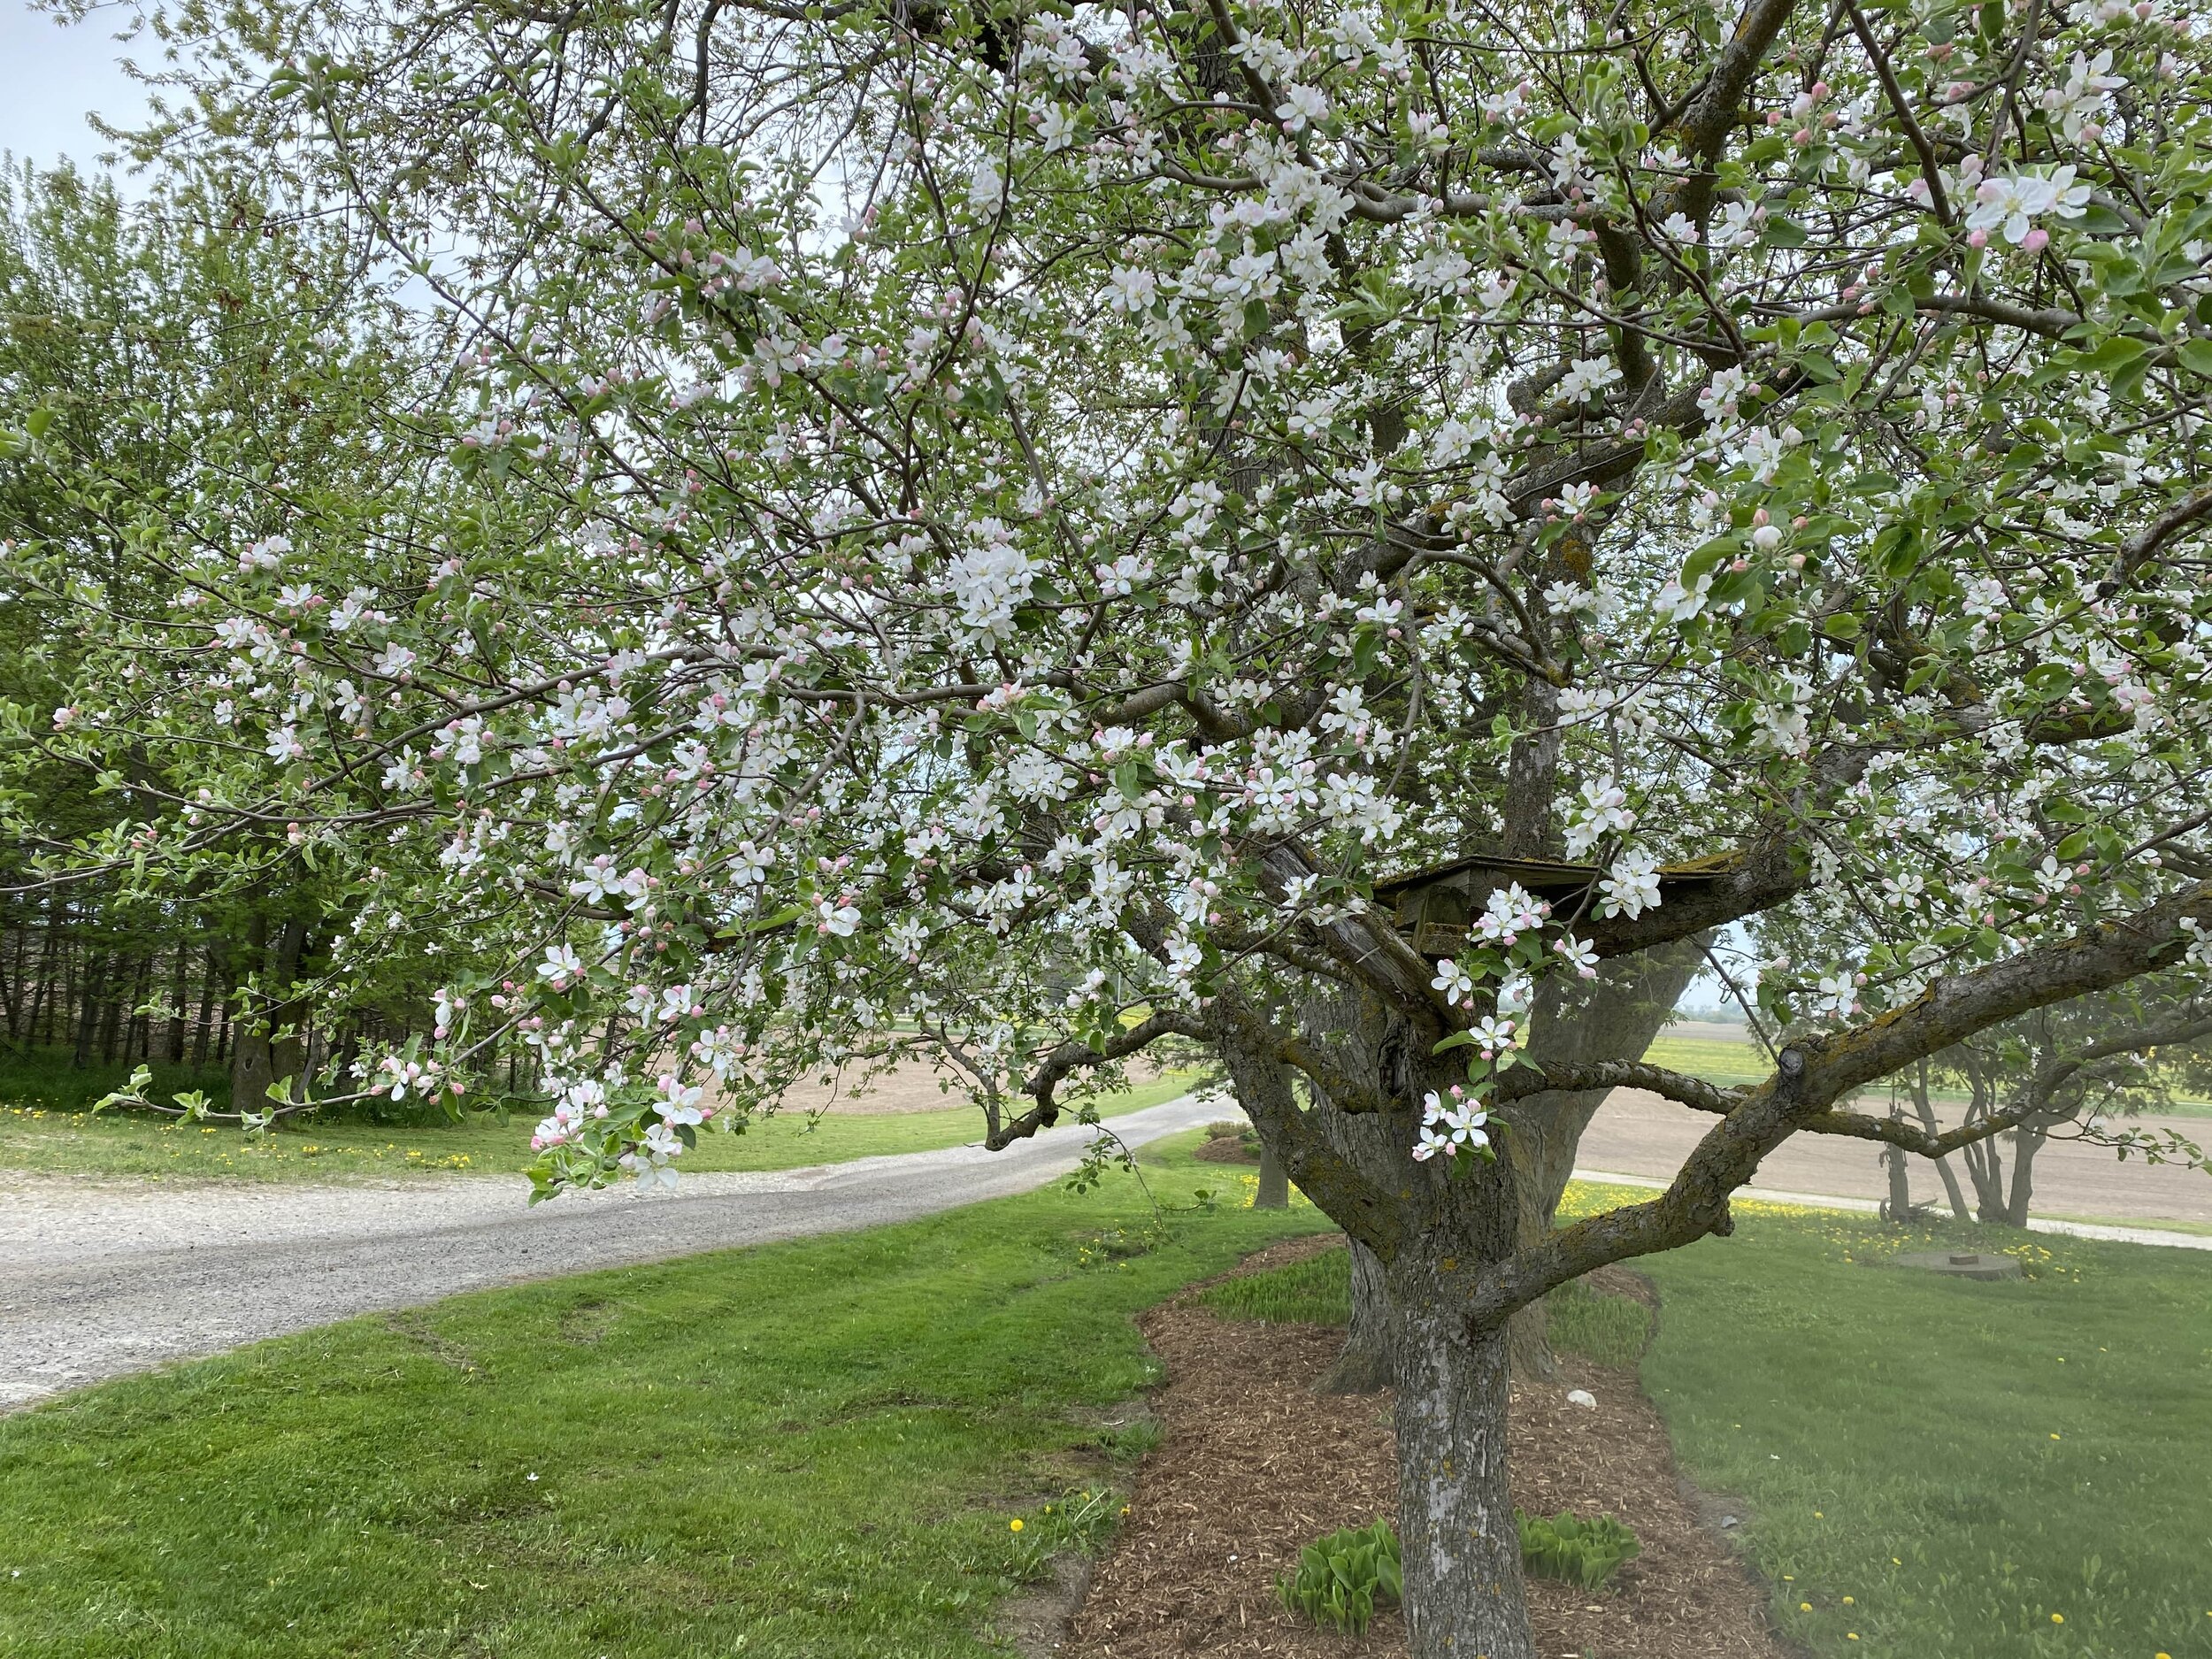 blossoming apple tree in Jill's front yard